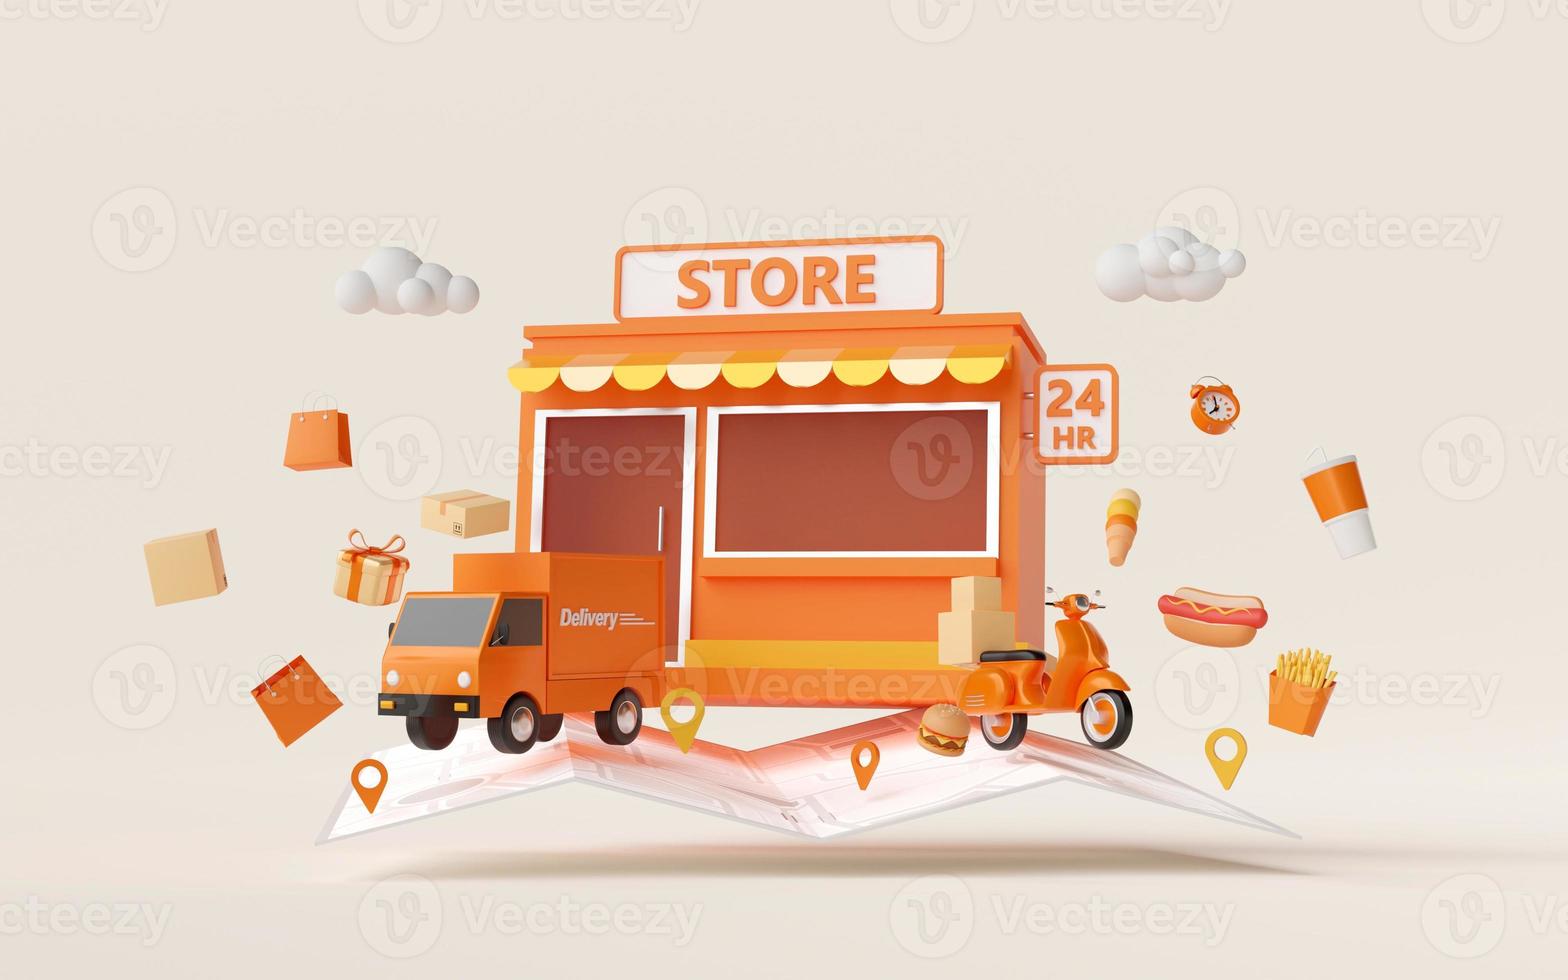 E-commerce concept, Convenience store shopping online and delivery service, 3d illustration photo